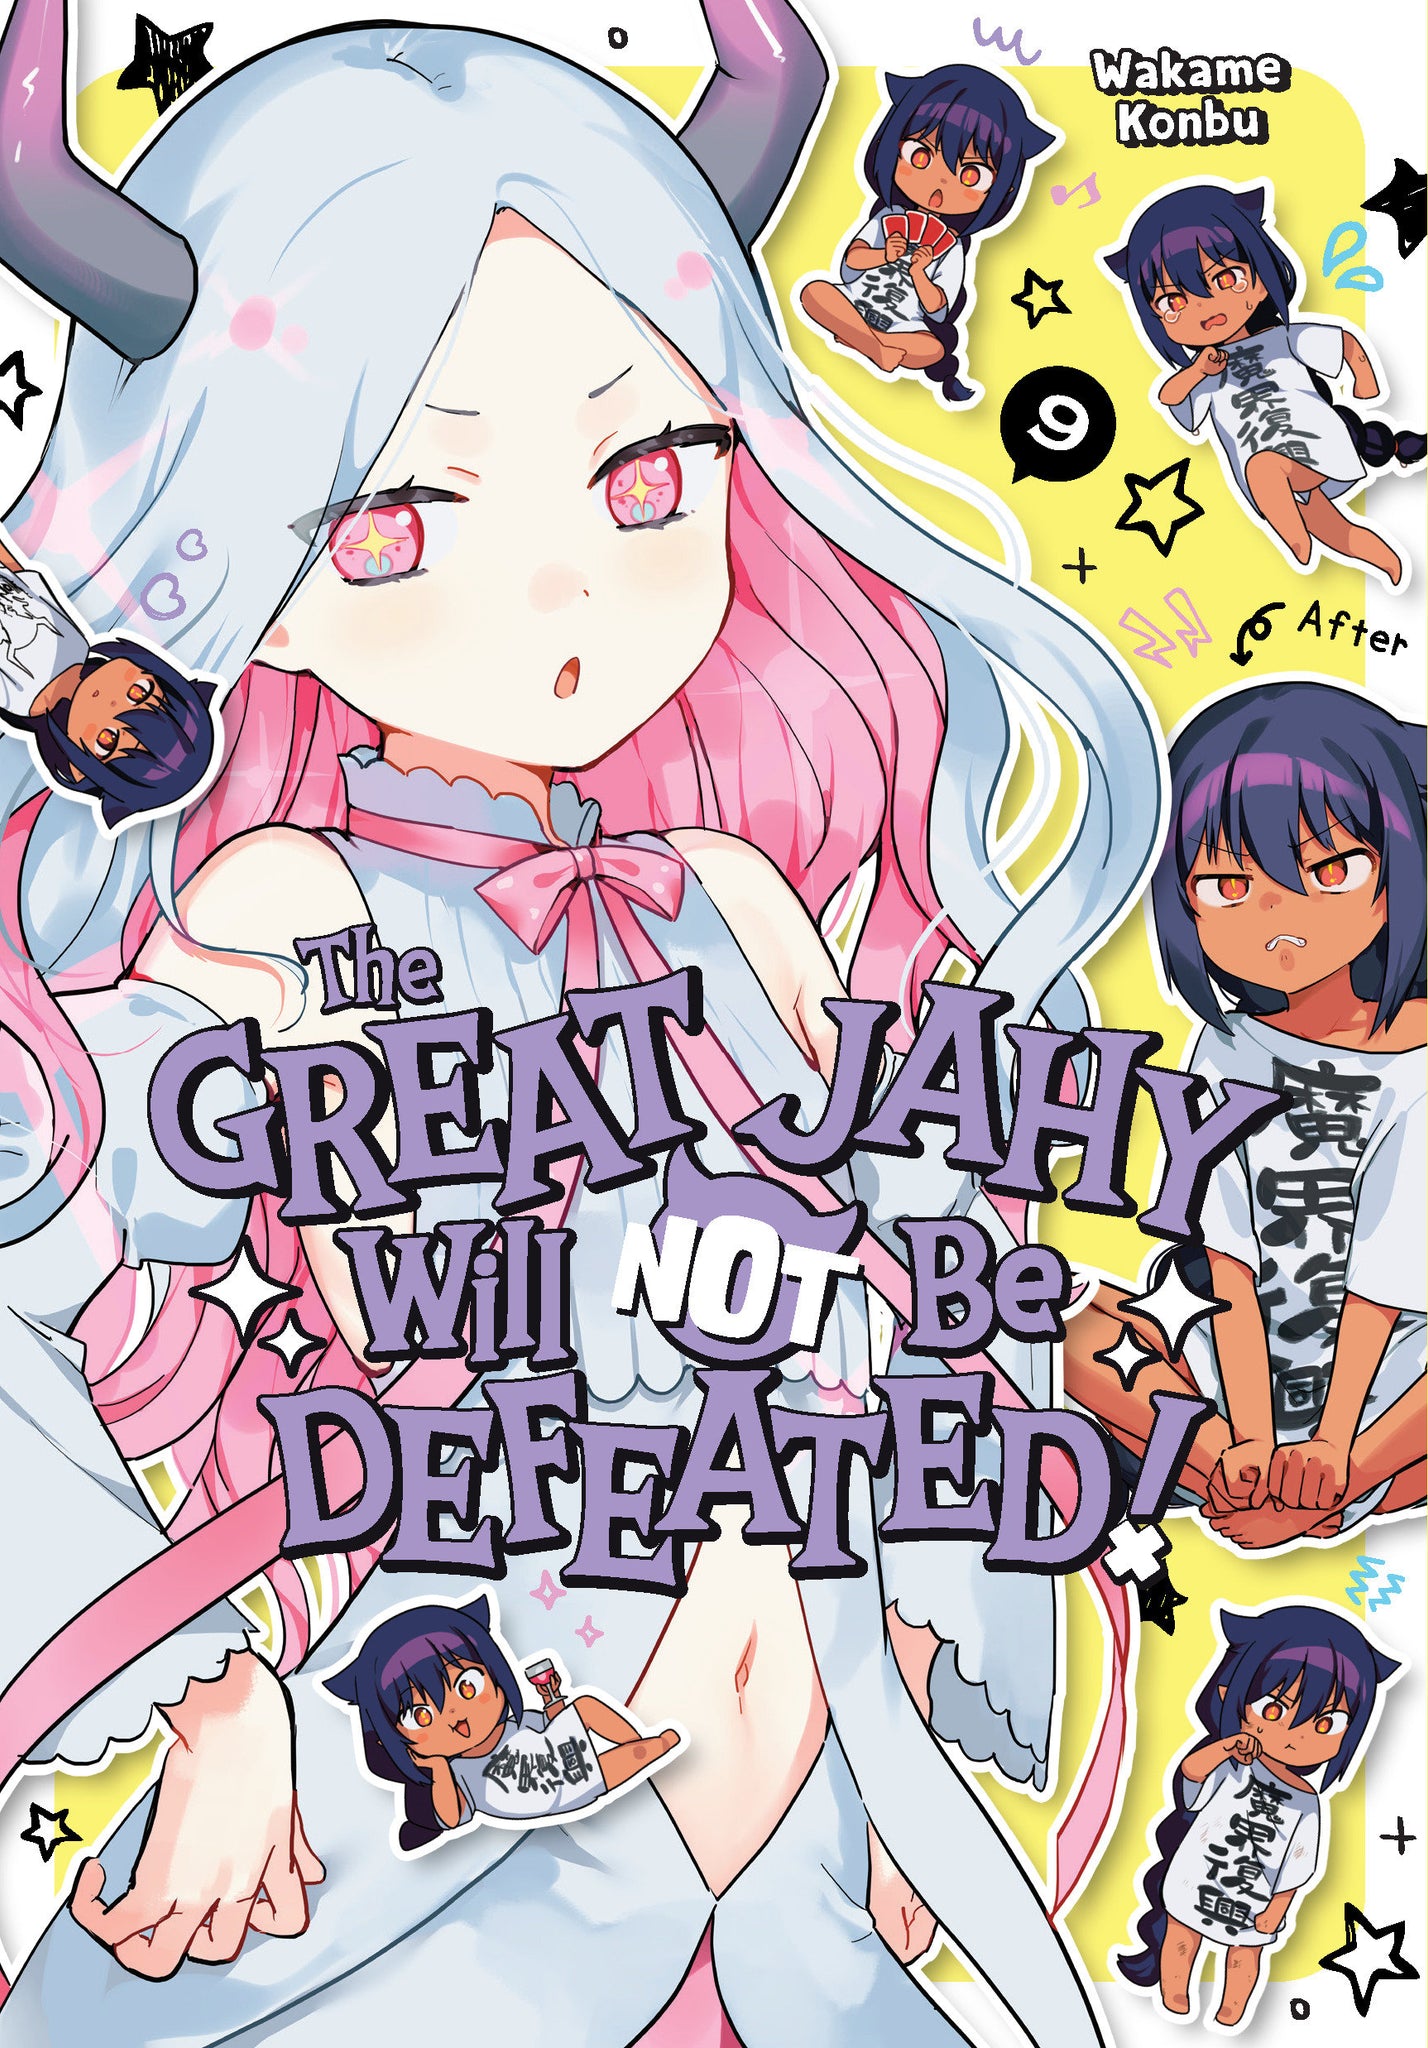 THE GREAT JAHY WILL NOT BE DEFEATED! 09 (7/17/24) PRESALE